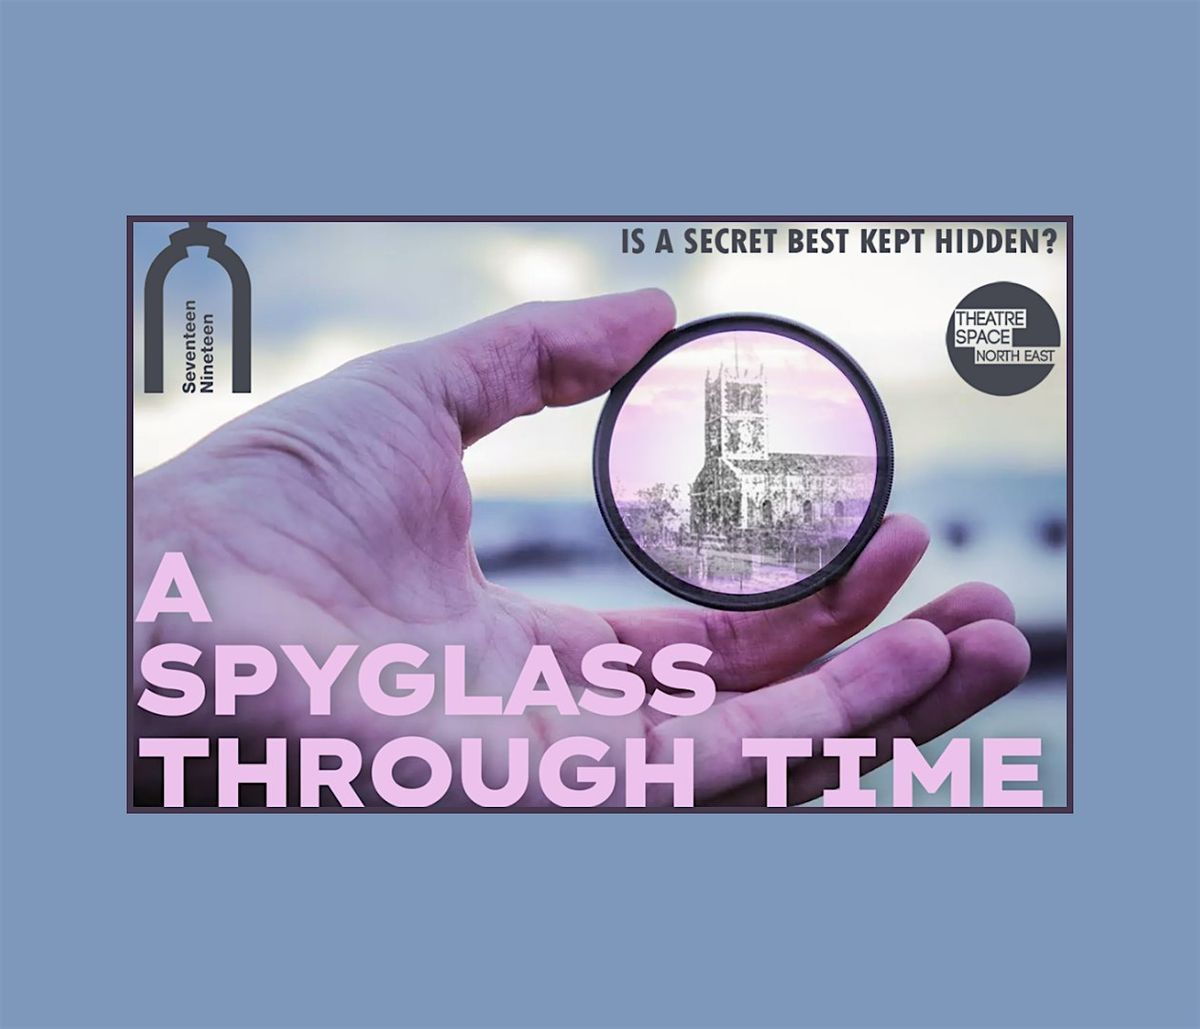 A Spyglass Through Time - Join Our Community Theatre Crew